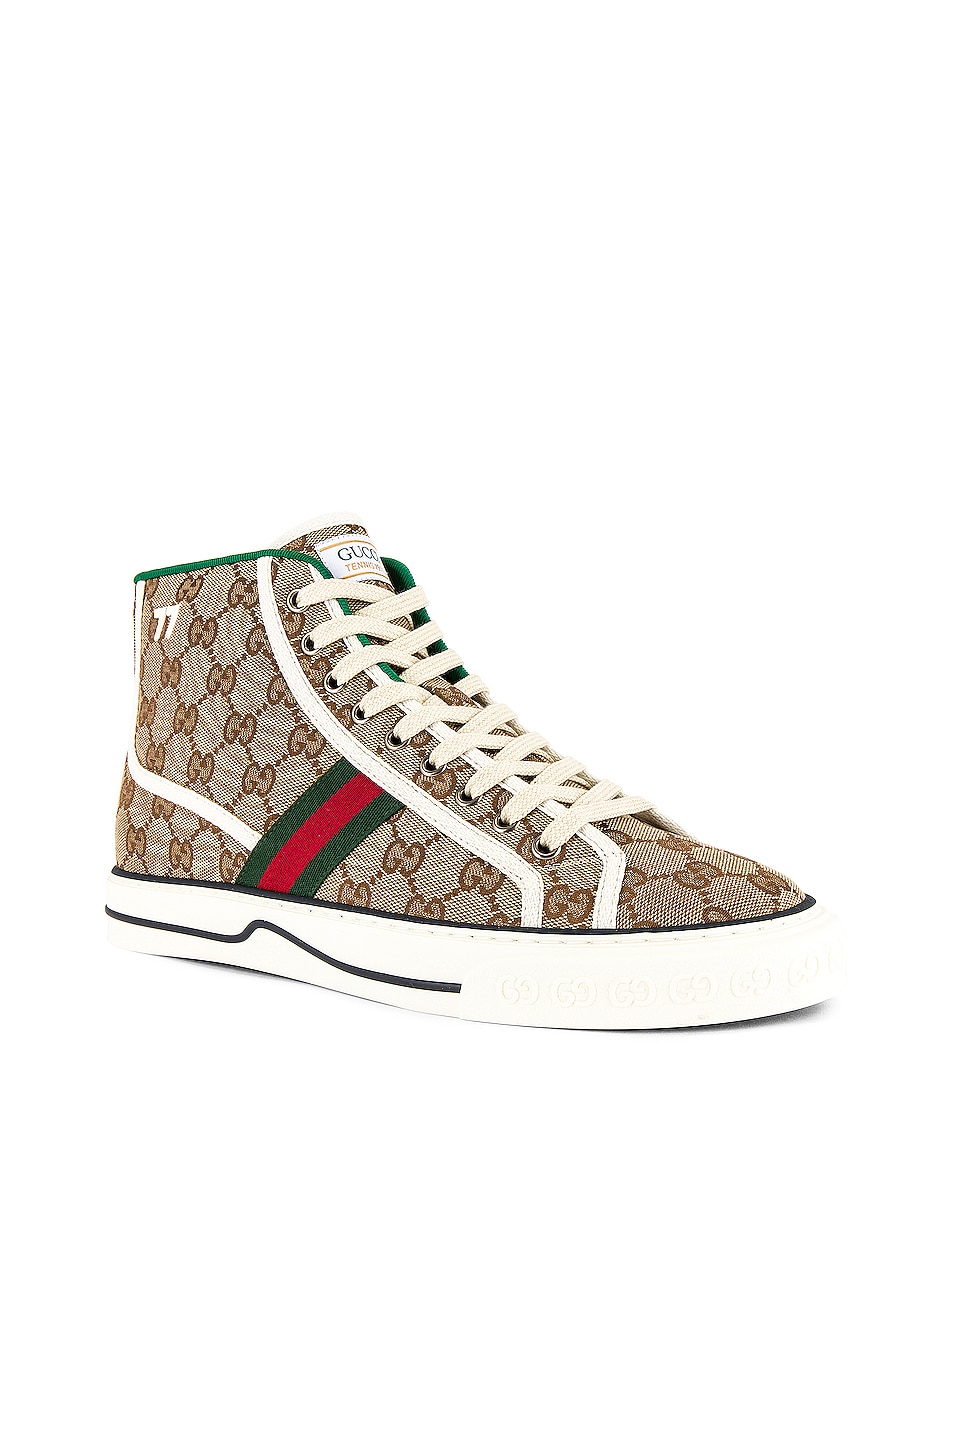 Image 1 of Gucci Gucci Tennis 1977 High Top Sneaker in Beige & White & Red & Green